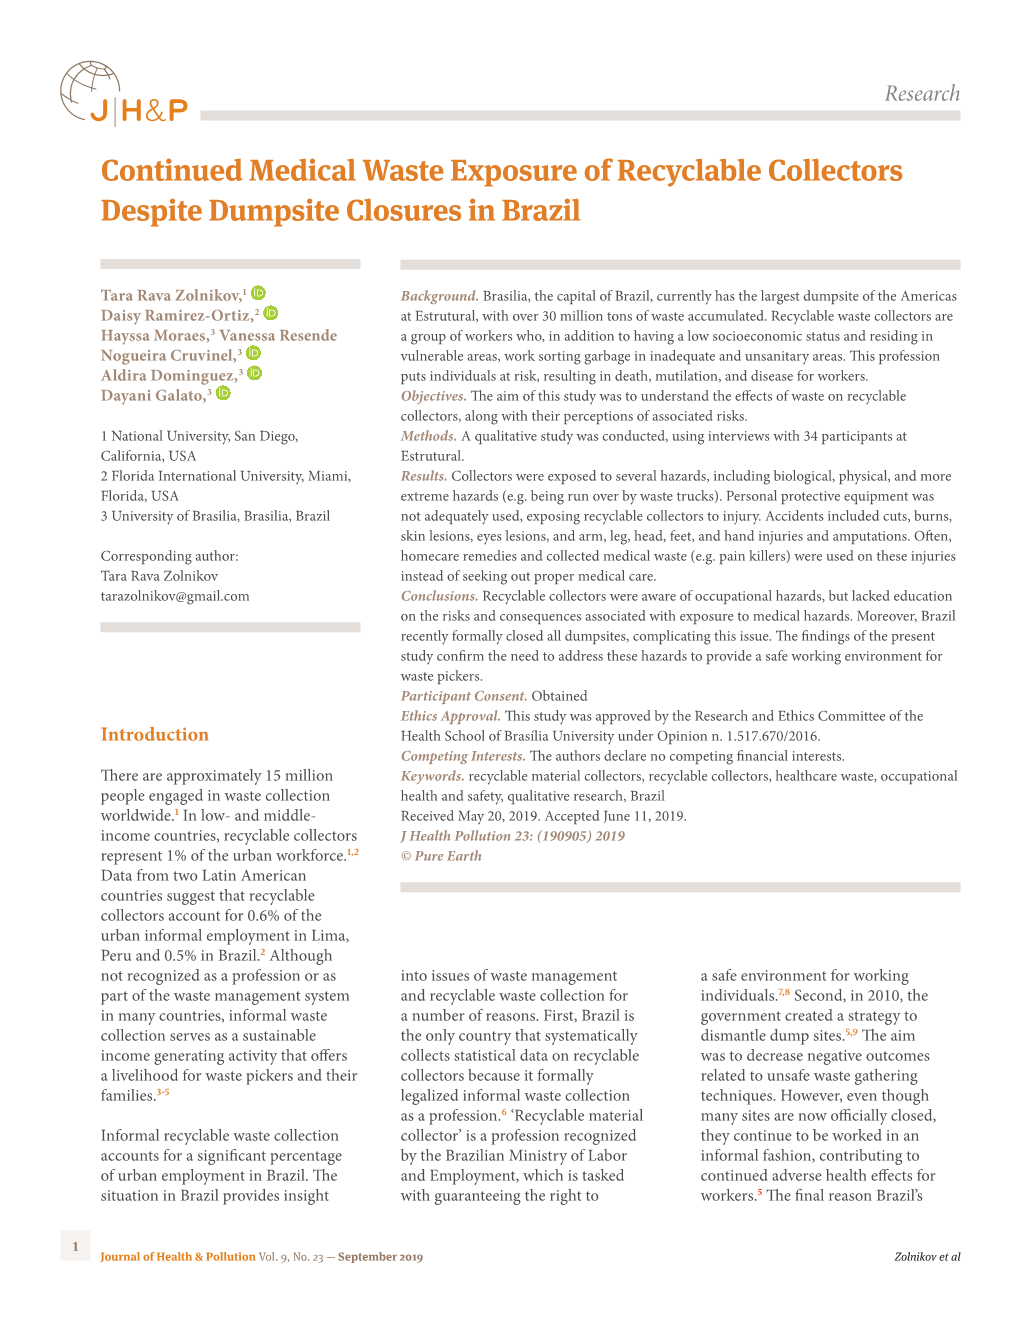 Continued Medical Waste Exposure of Recyclable Collectors Despite Dumpsite Closures in Brazil